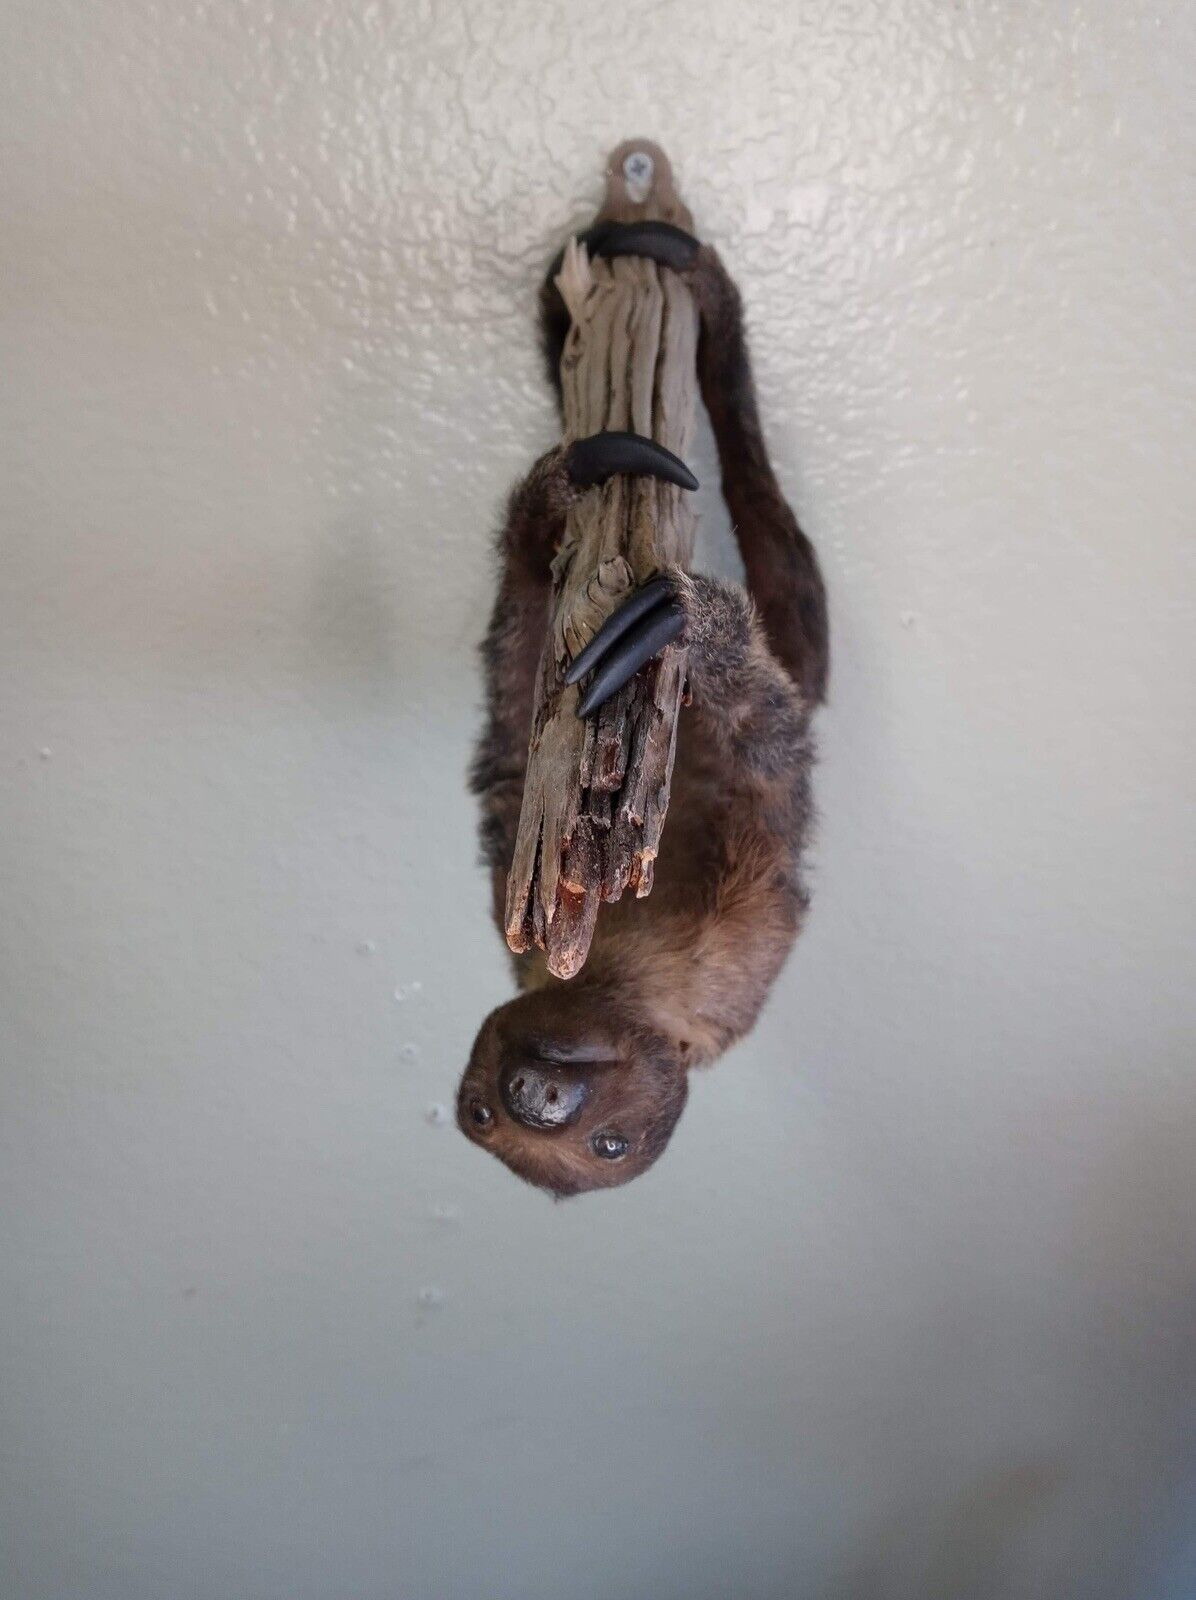 Baby Sloth Taxidermy Table Mount Full Body